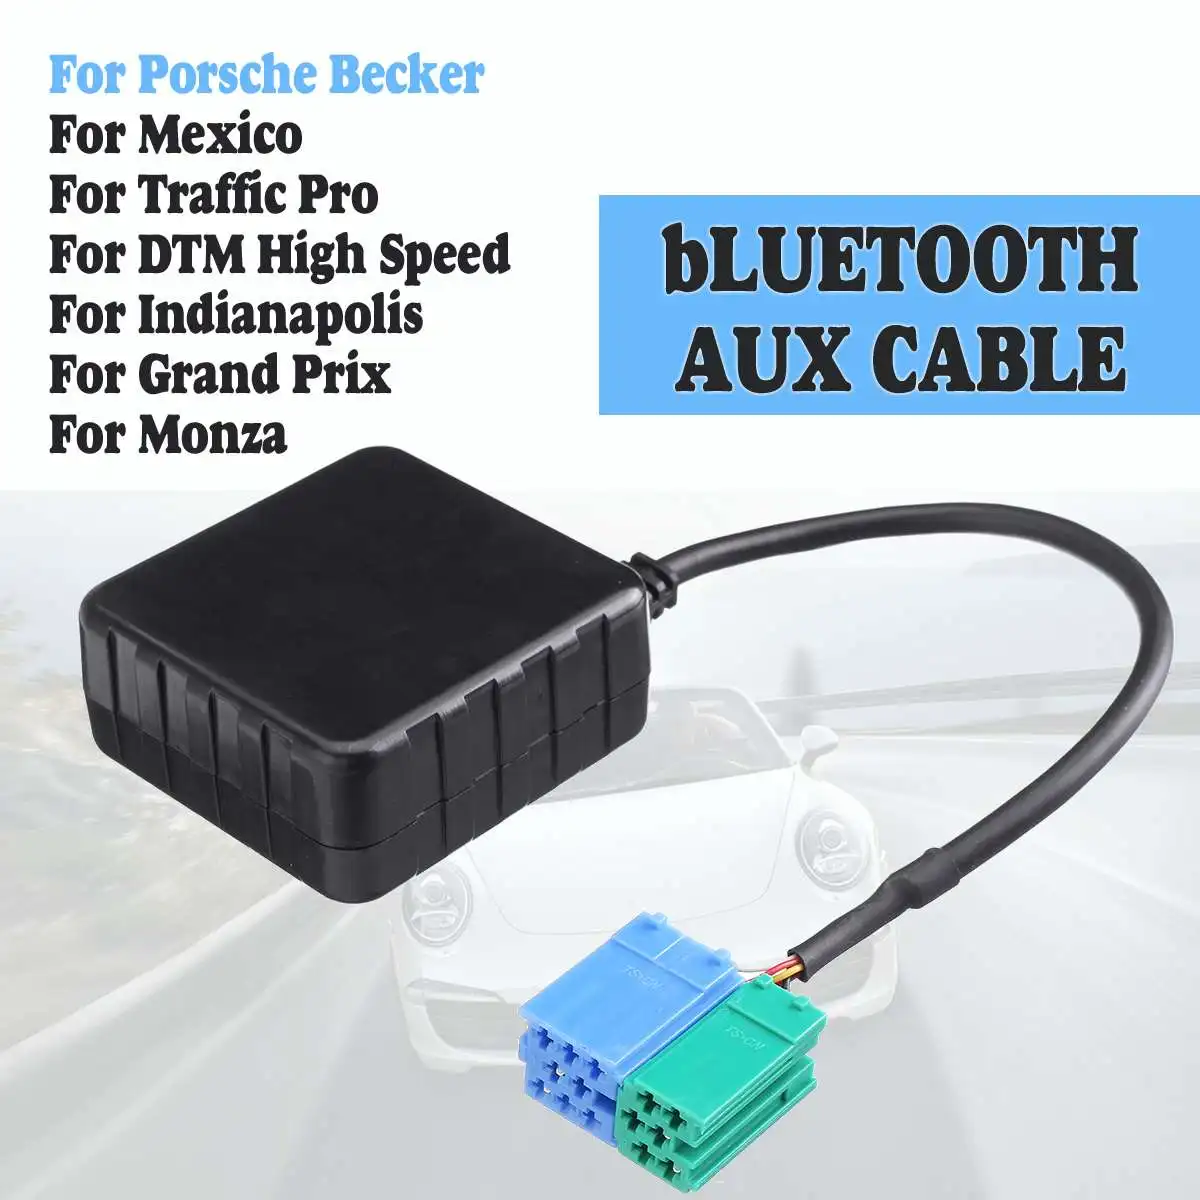 

HIFI Audio Car bluetooth 5.0 Module AUX Cable Adapter Radio Stereo For Porsche Becker Mexico Traffic Pro DTM